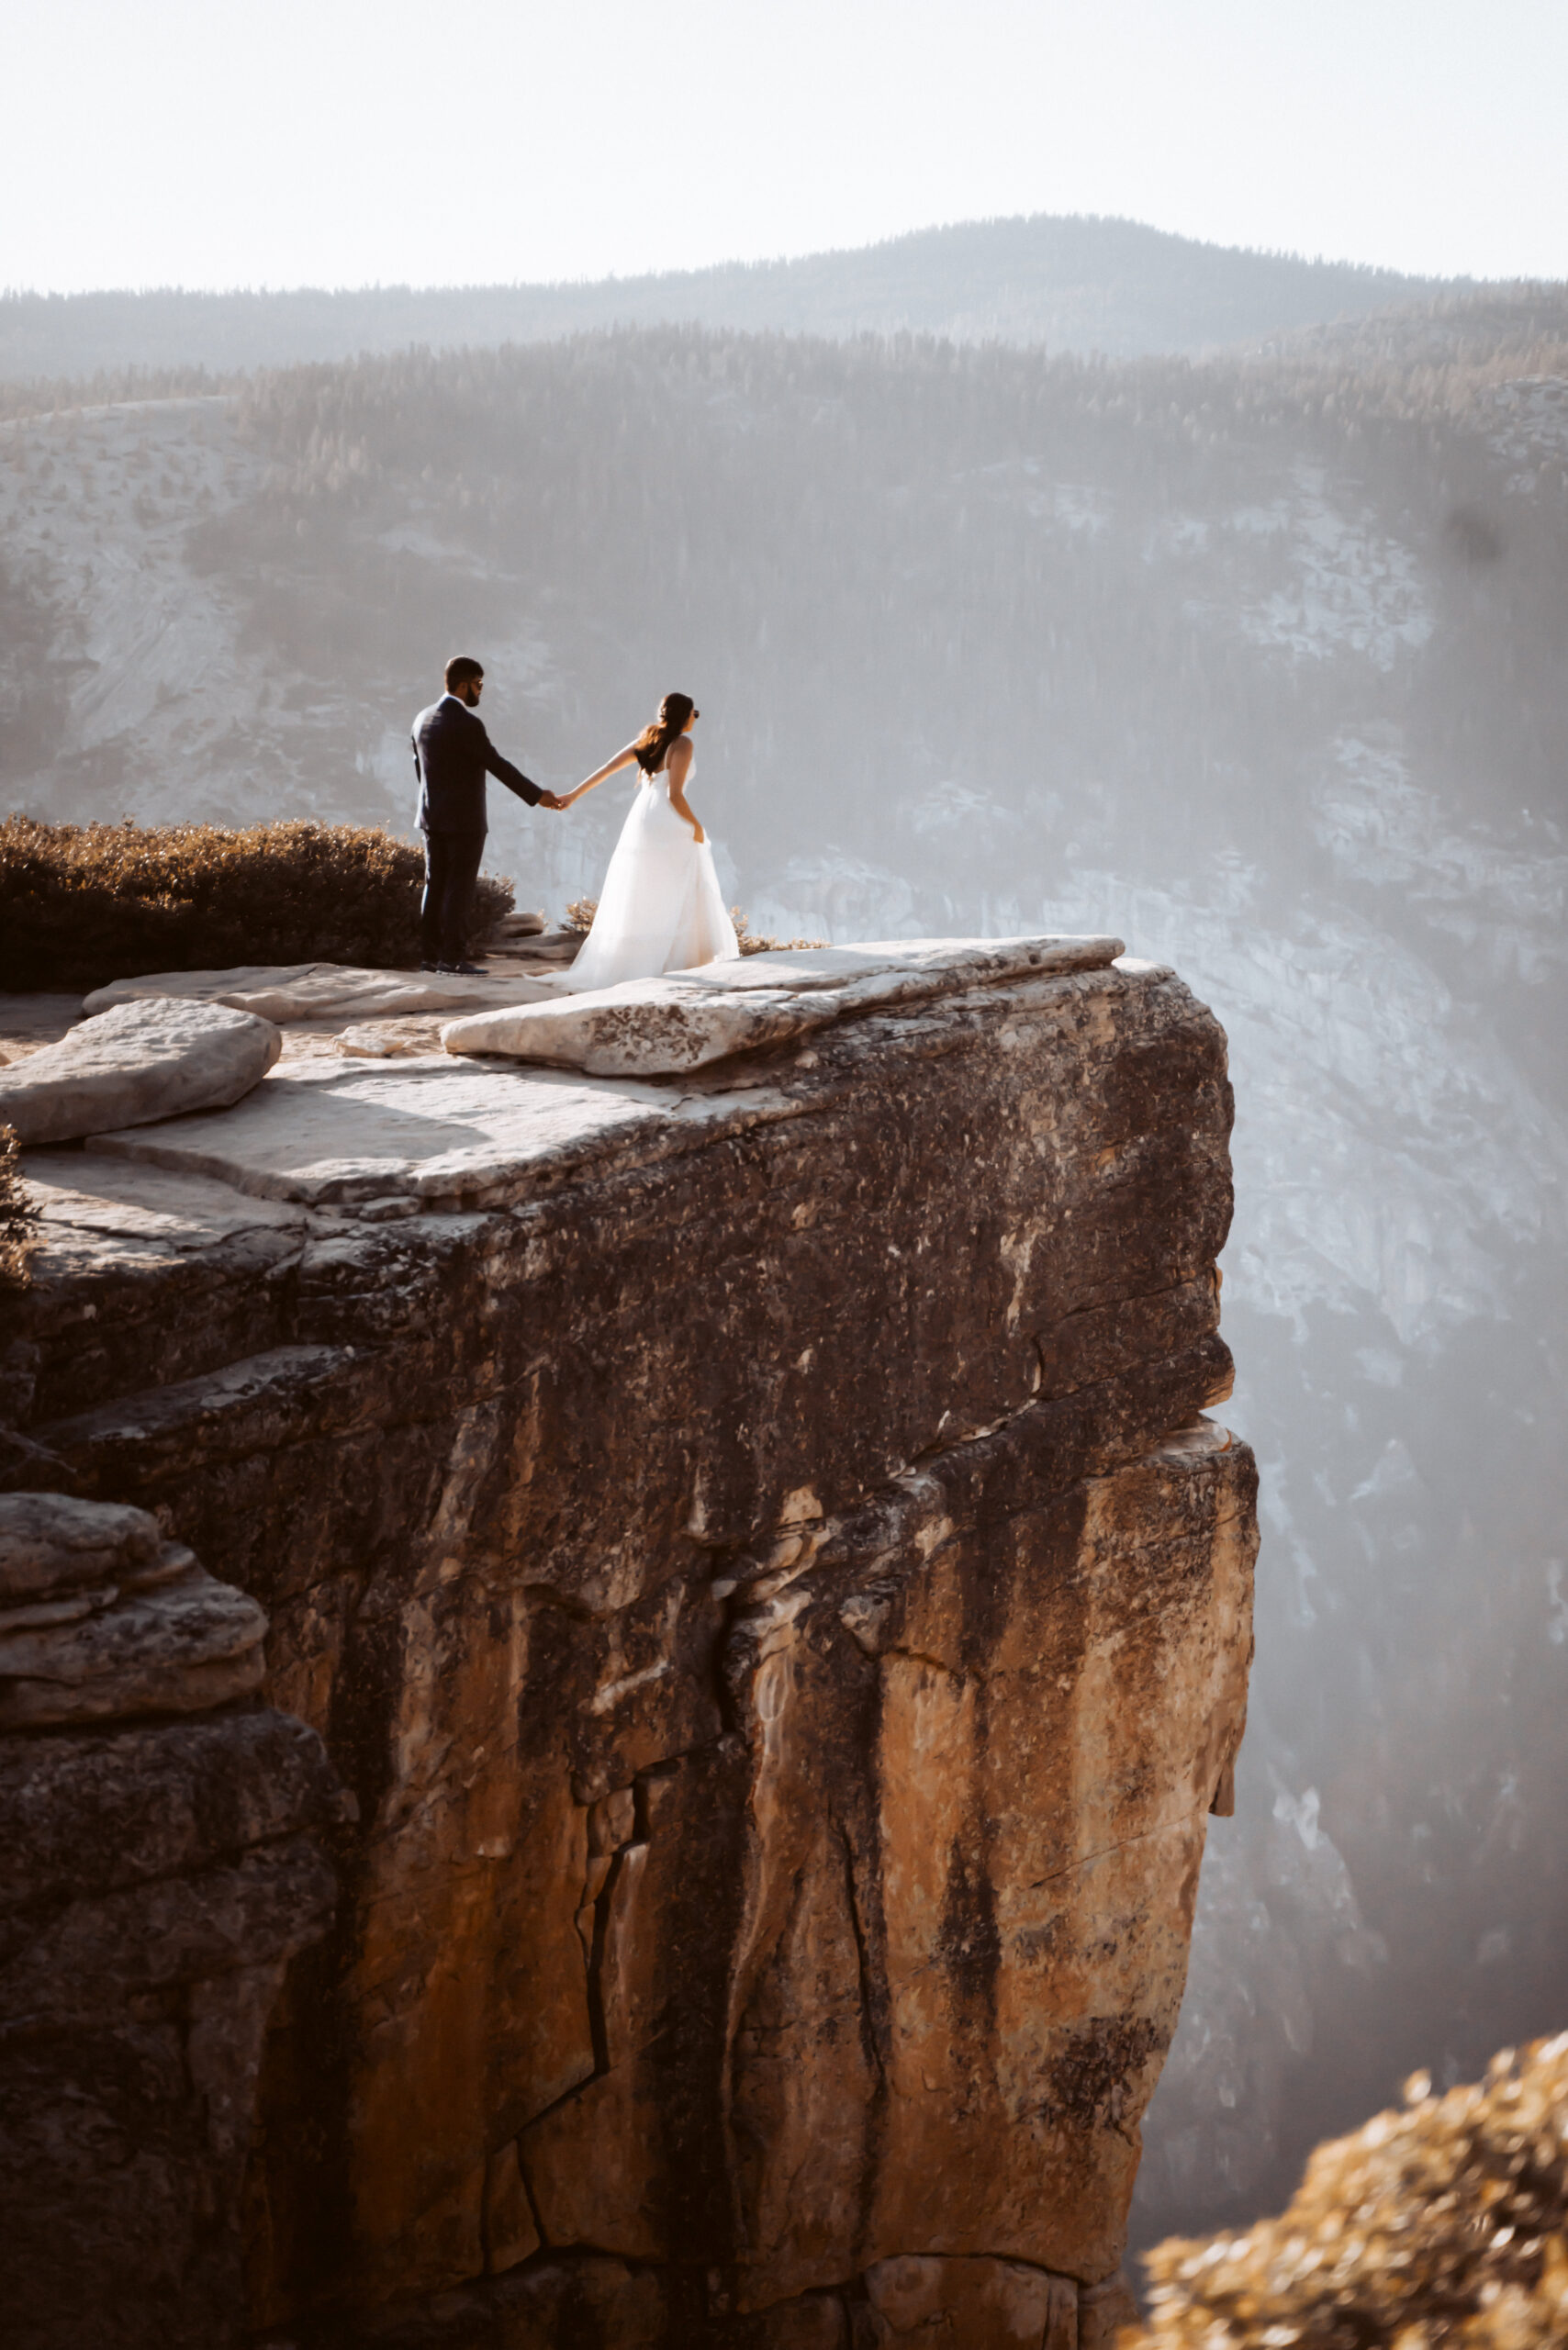 A elopement couple walking to the edge of the cliff overlooking the mountains for their Yosemite elopement